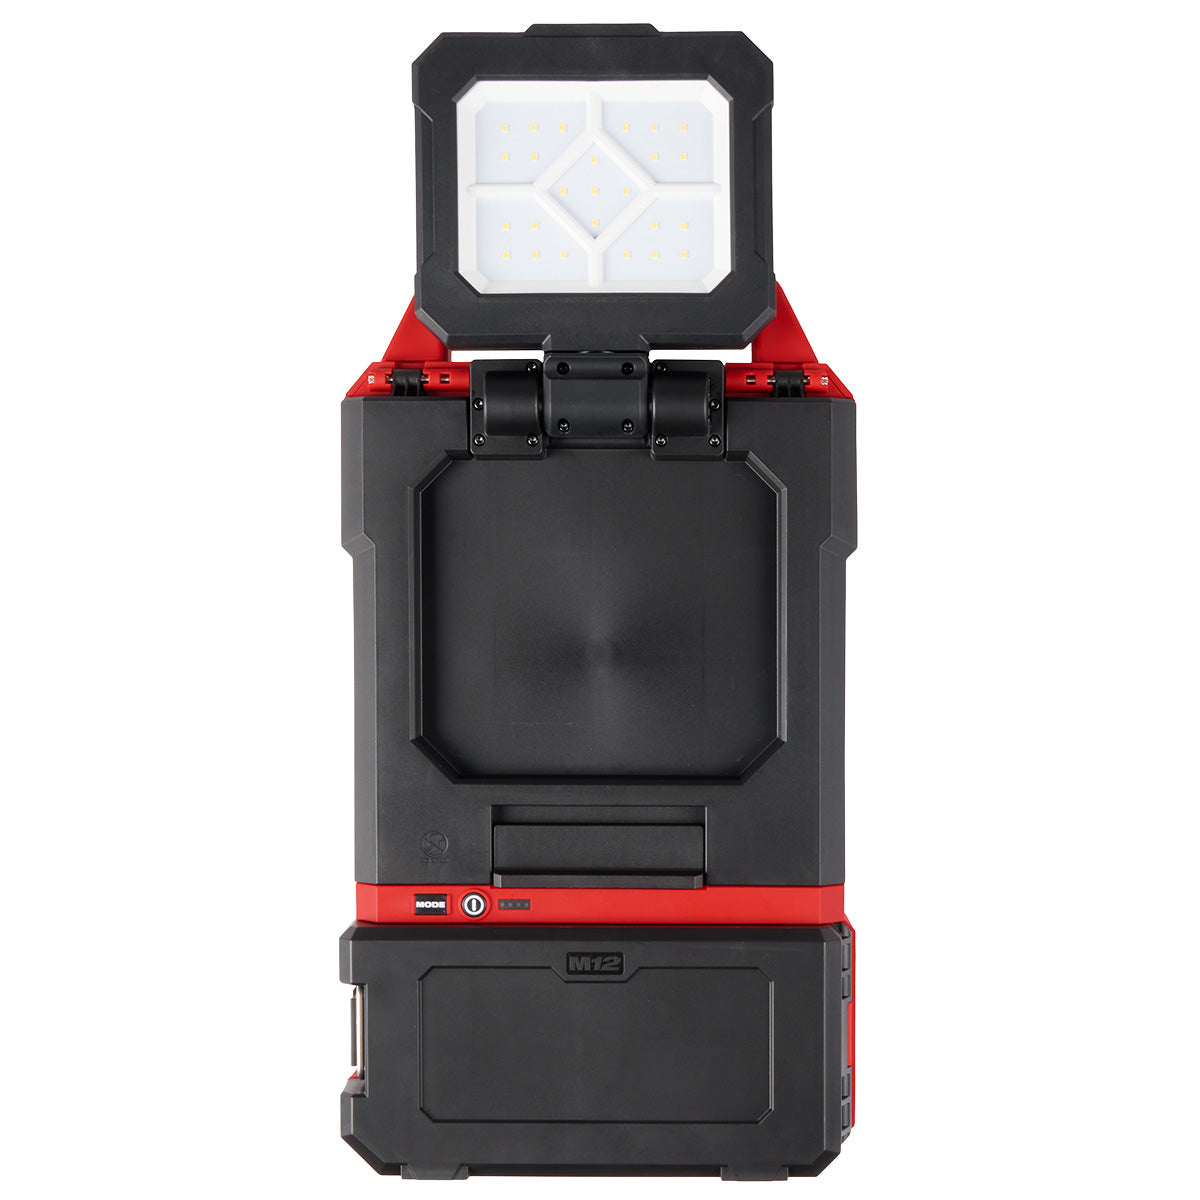 Milwaukee 2356-20 12V M12 Lithium-Ion Cordless PACKOUT Flood Light w/ USB Charging (Bare Tool)